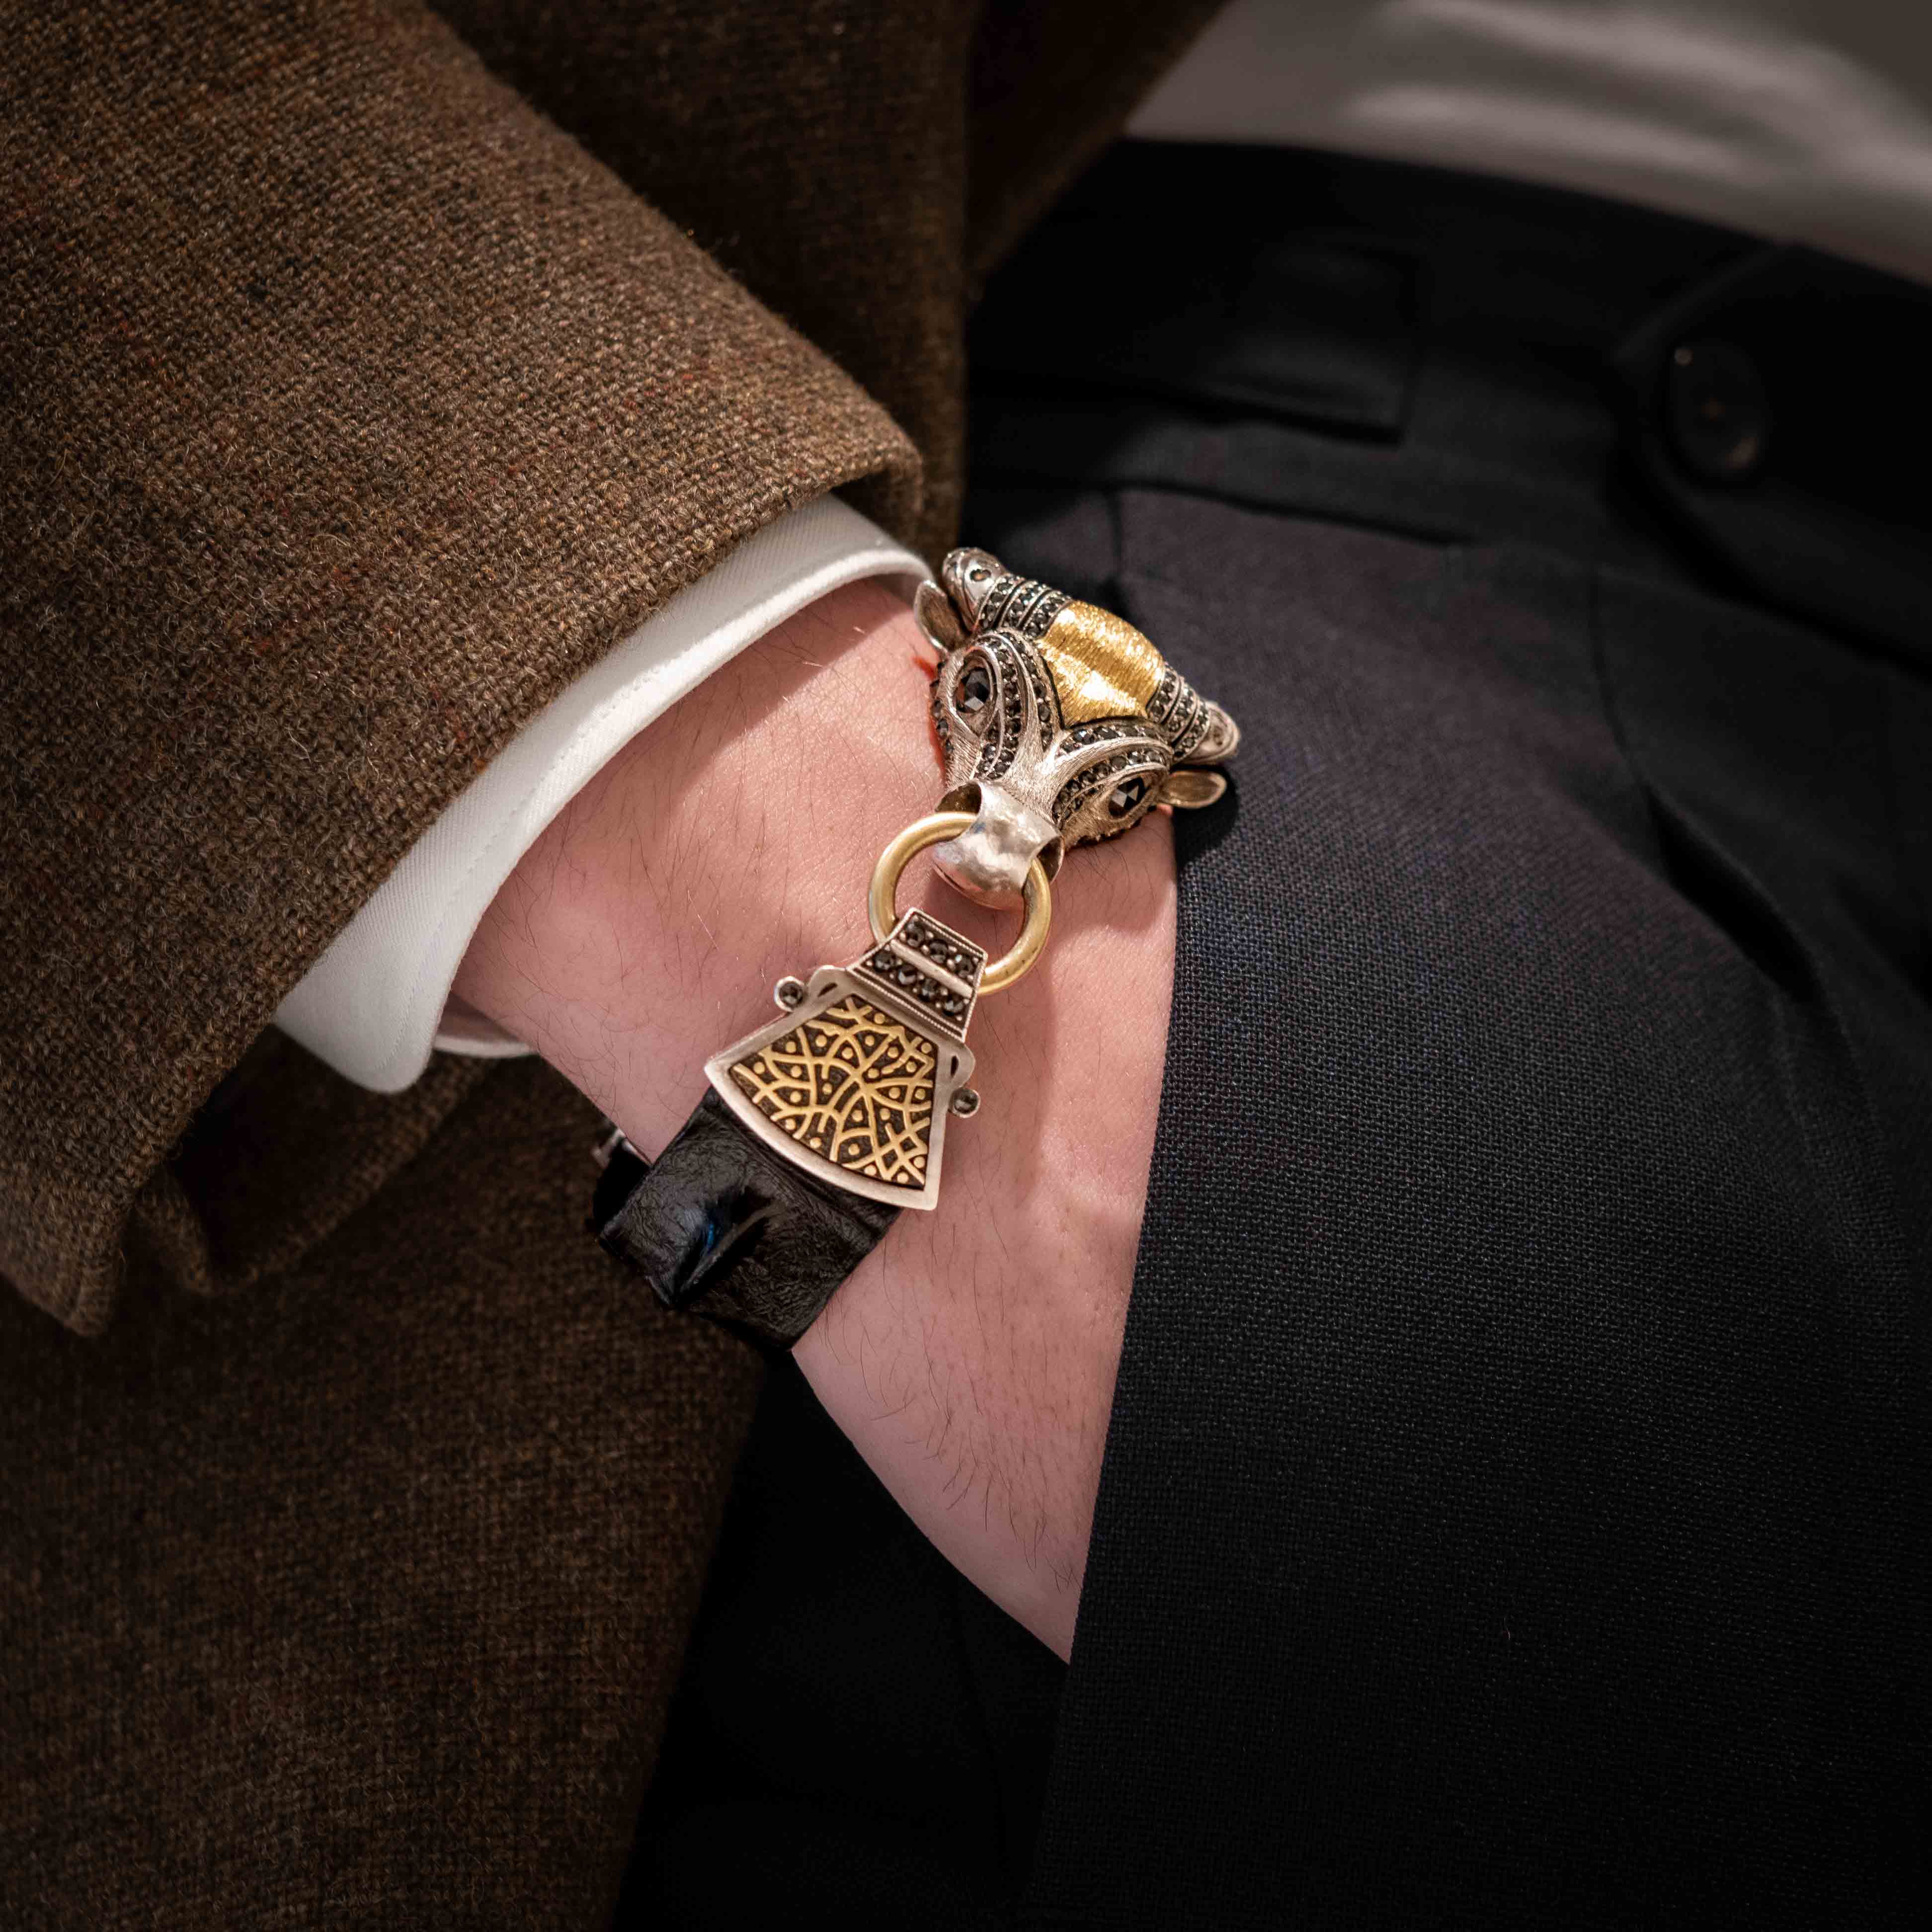 Taru Jewelry Bull Bracelet is a stunning piece that exudes strength and power. Crafted from 18K yellow gold and silver with black and brown diamonds, it features the symbol of a bull prominently displayed on the front.